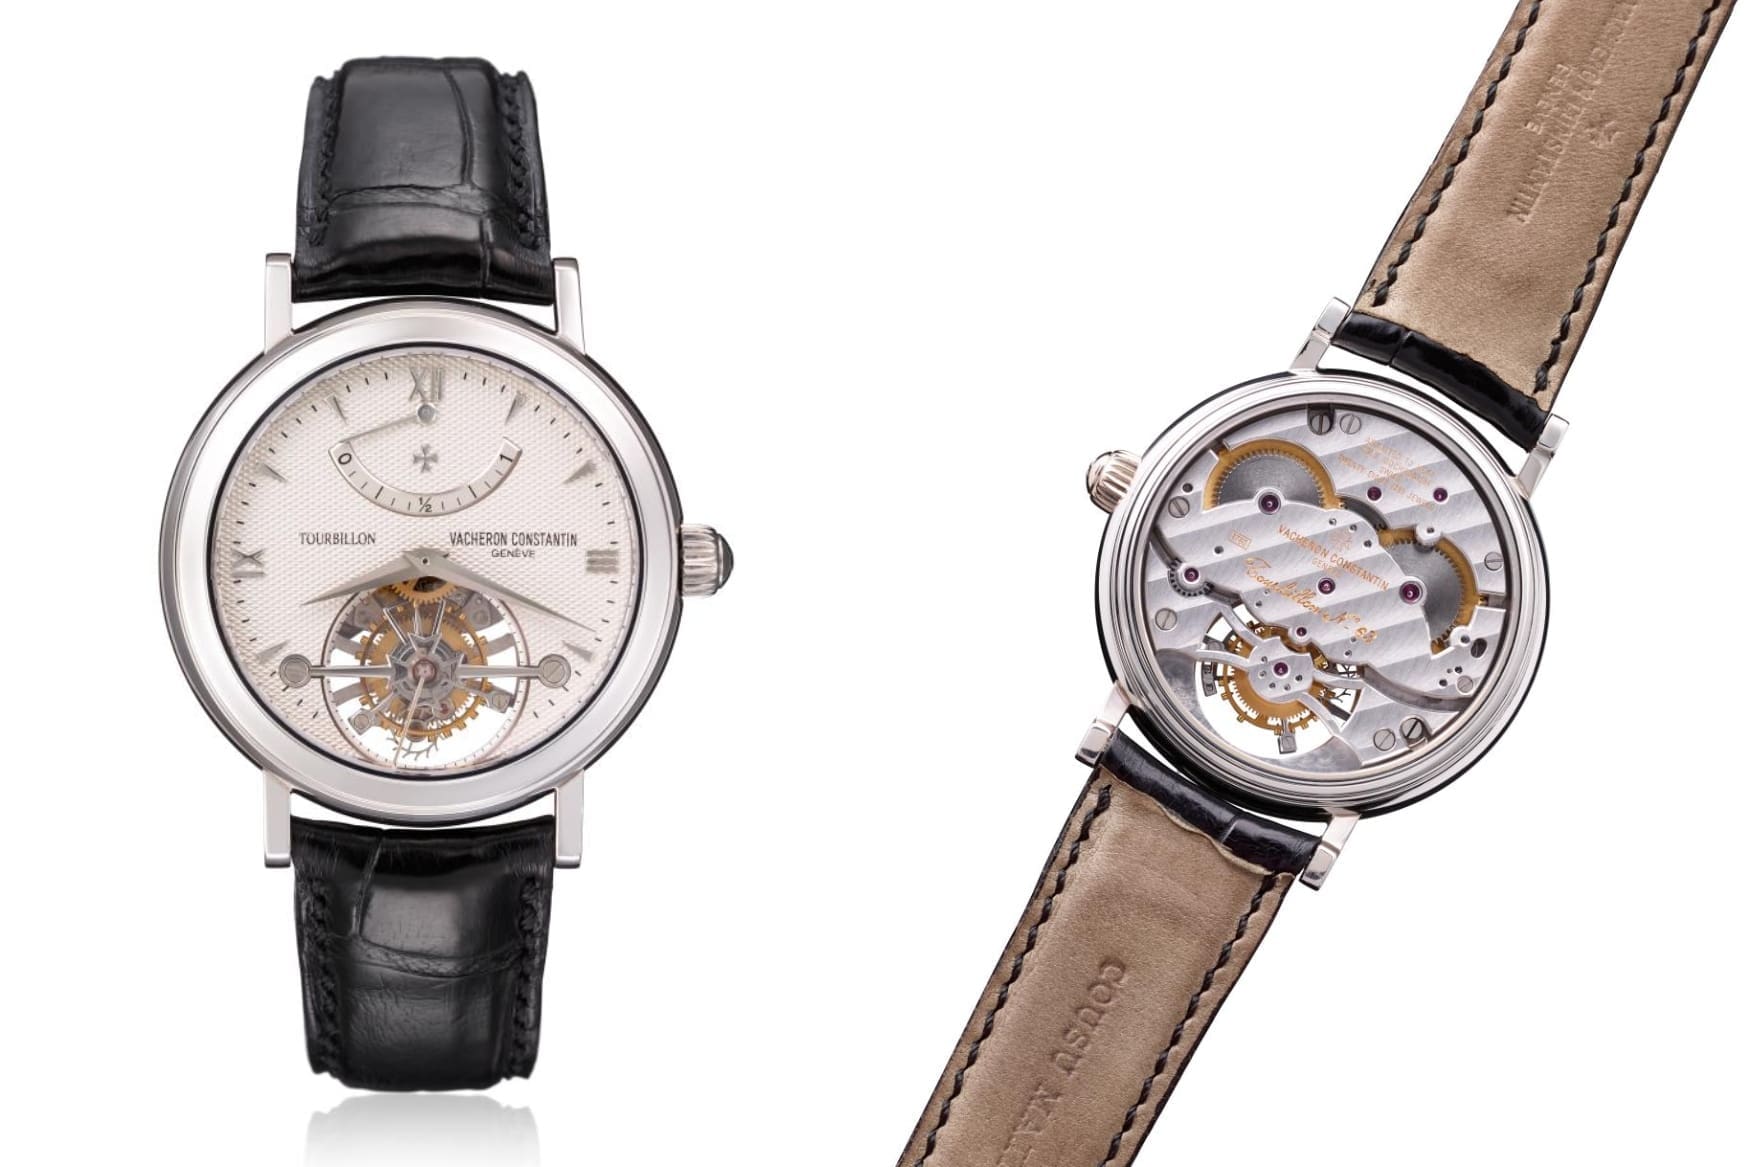 Vacheron Constantin display a selection of heritage high complication models in Sydney